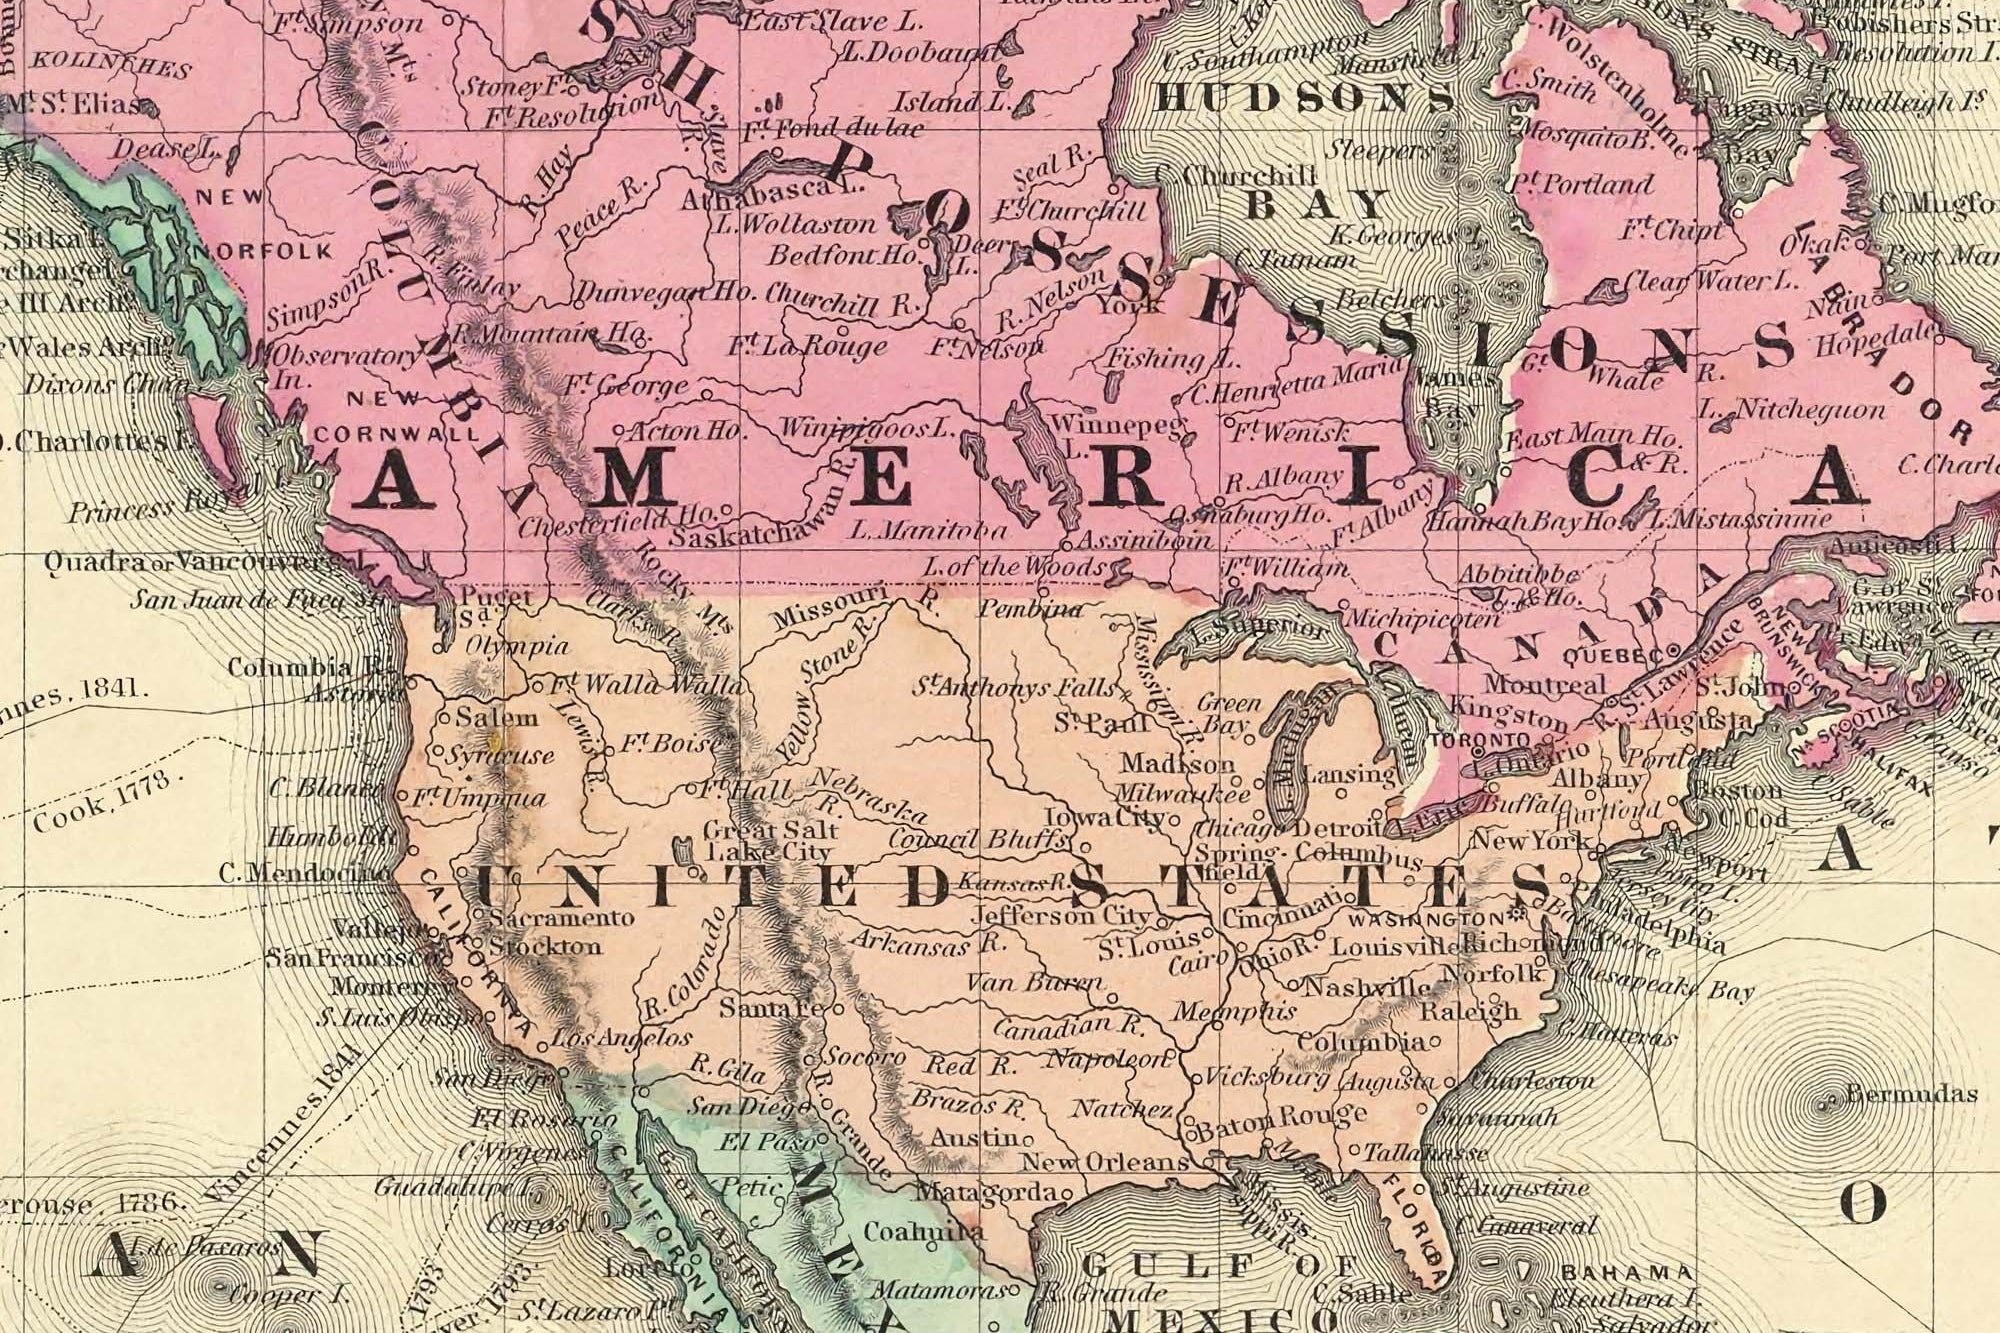 historical map of the united states in 1800s